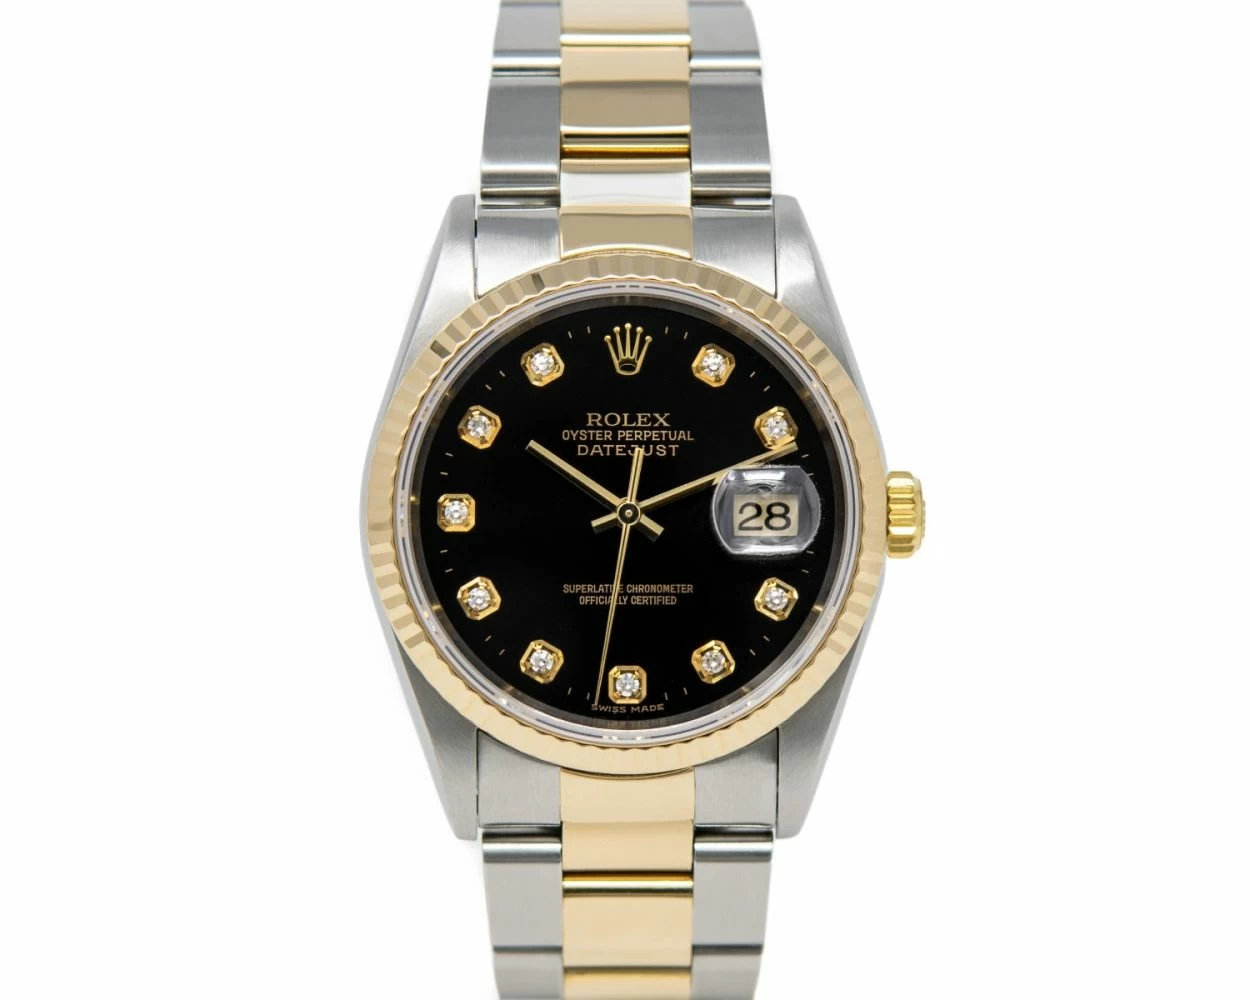 Rolex Datejust 36 Yellow Gold/Steel Bright Black Diamond Dial & Fluted